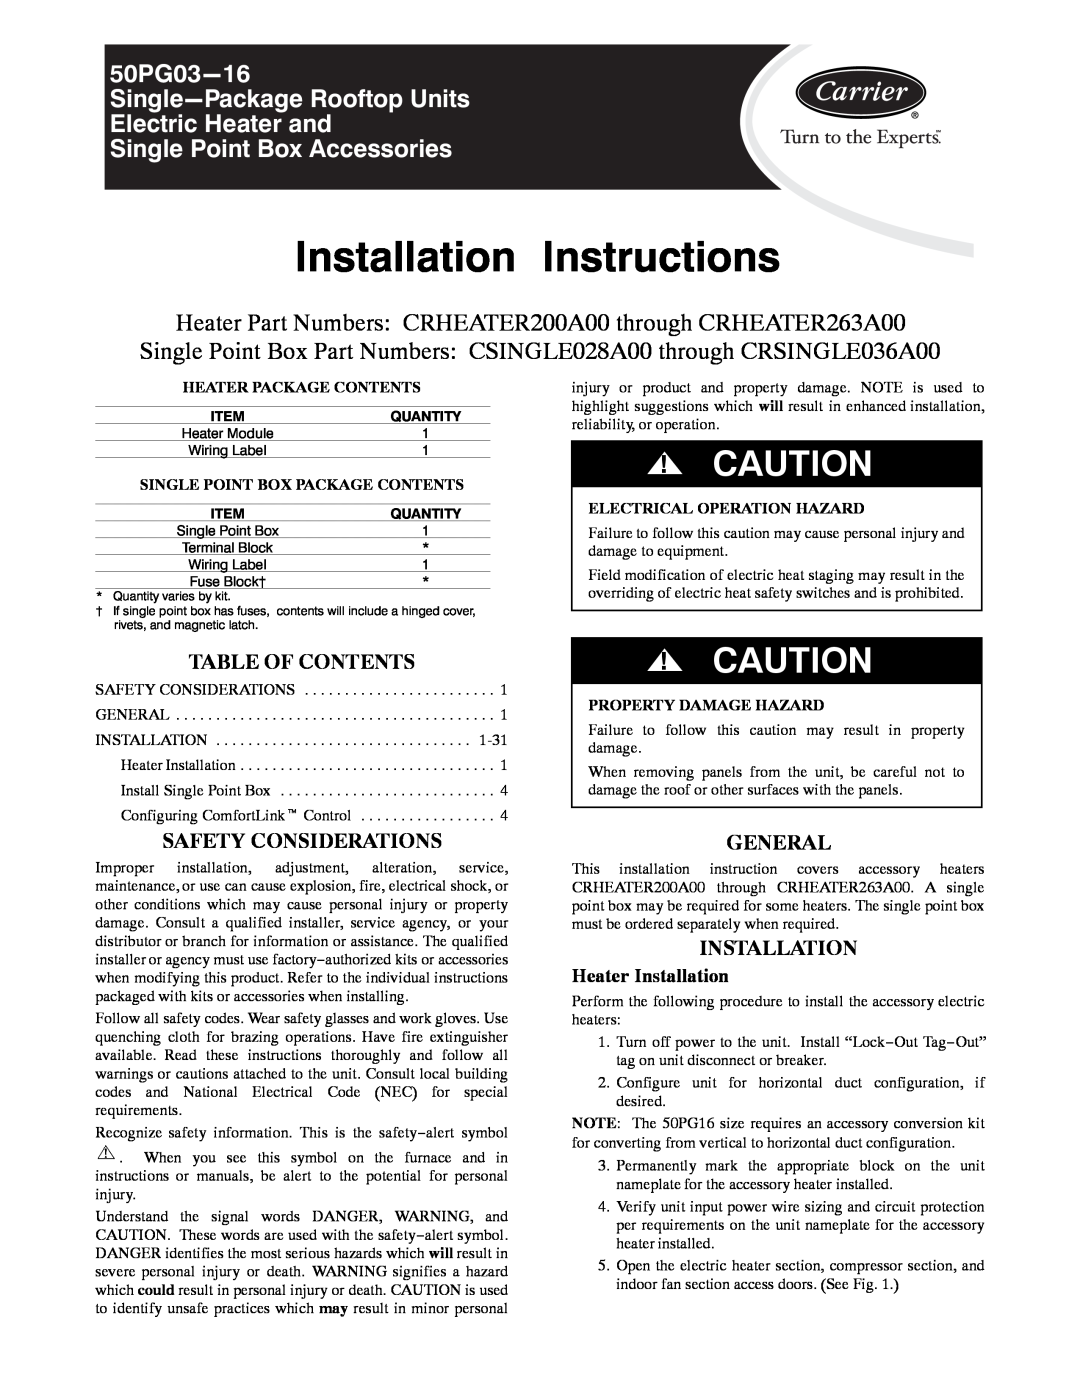 Carrier 50PG03-16 installation instructions Installation Instructions, 50PG03−16, Single Point Box Accessories 